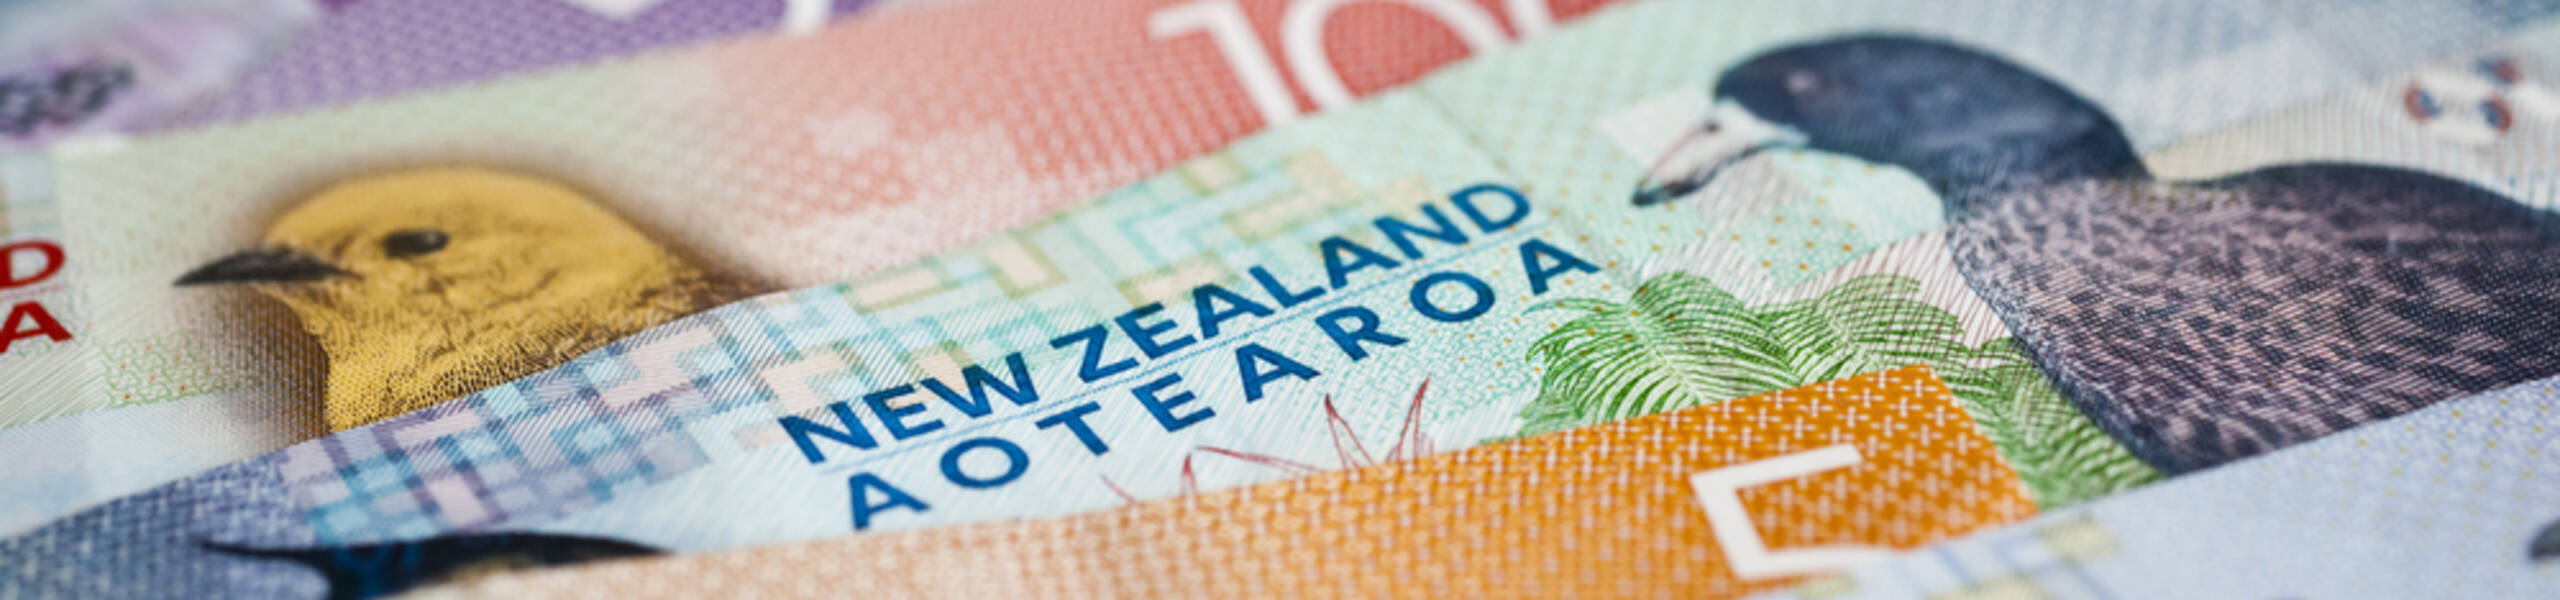 NZD/CAD is continuing downward movement